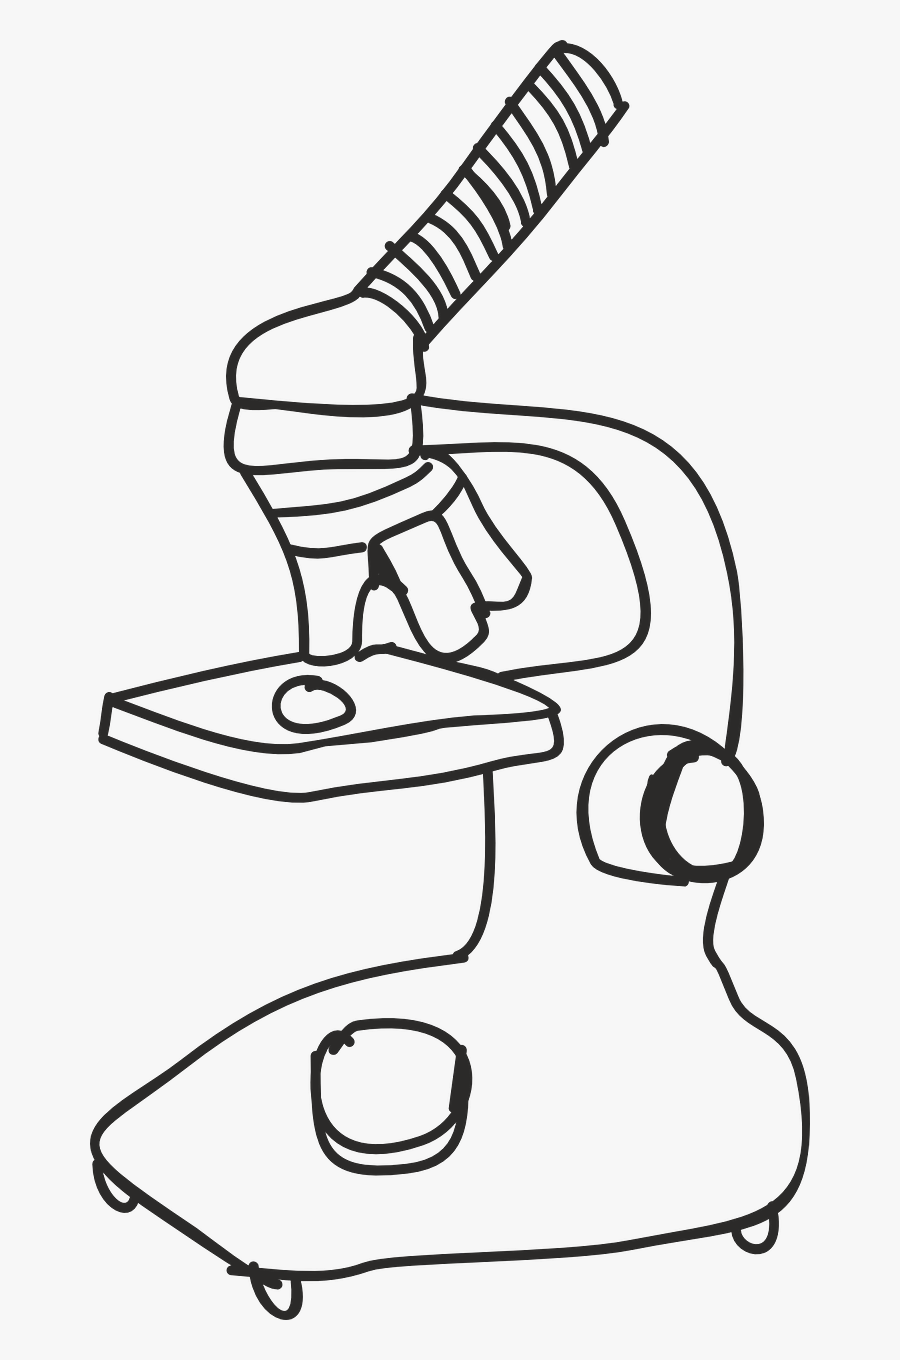 Microscope The Microscope Look - Microscope Drawing, Transparent Clipart